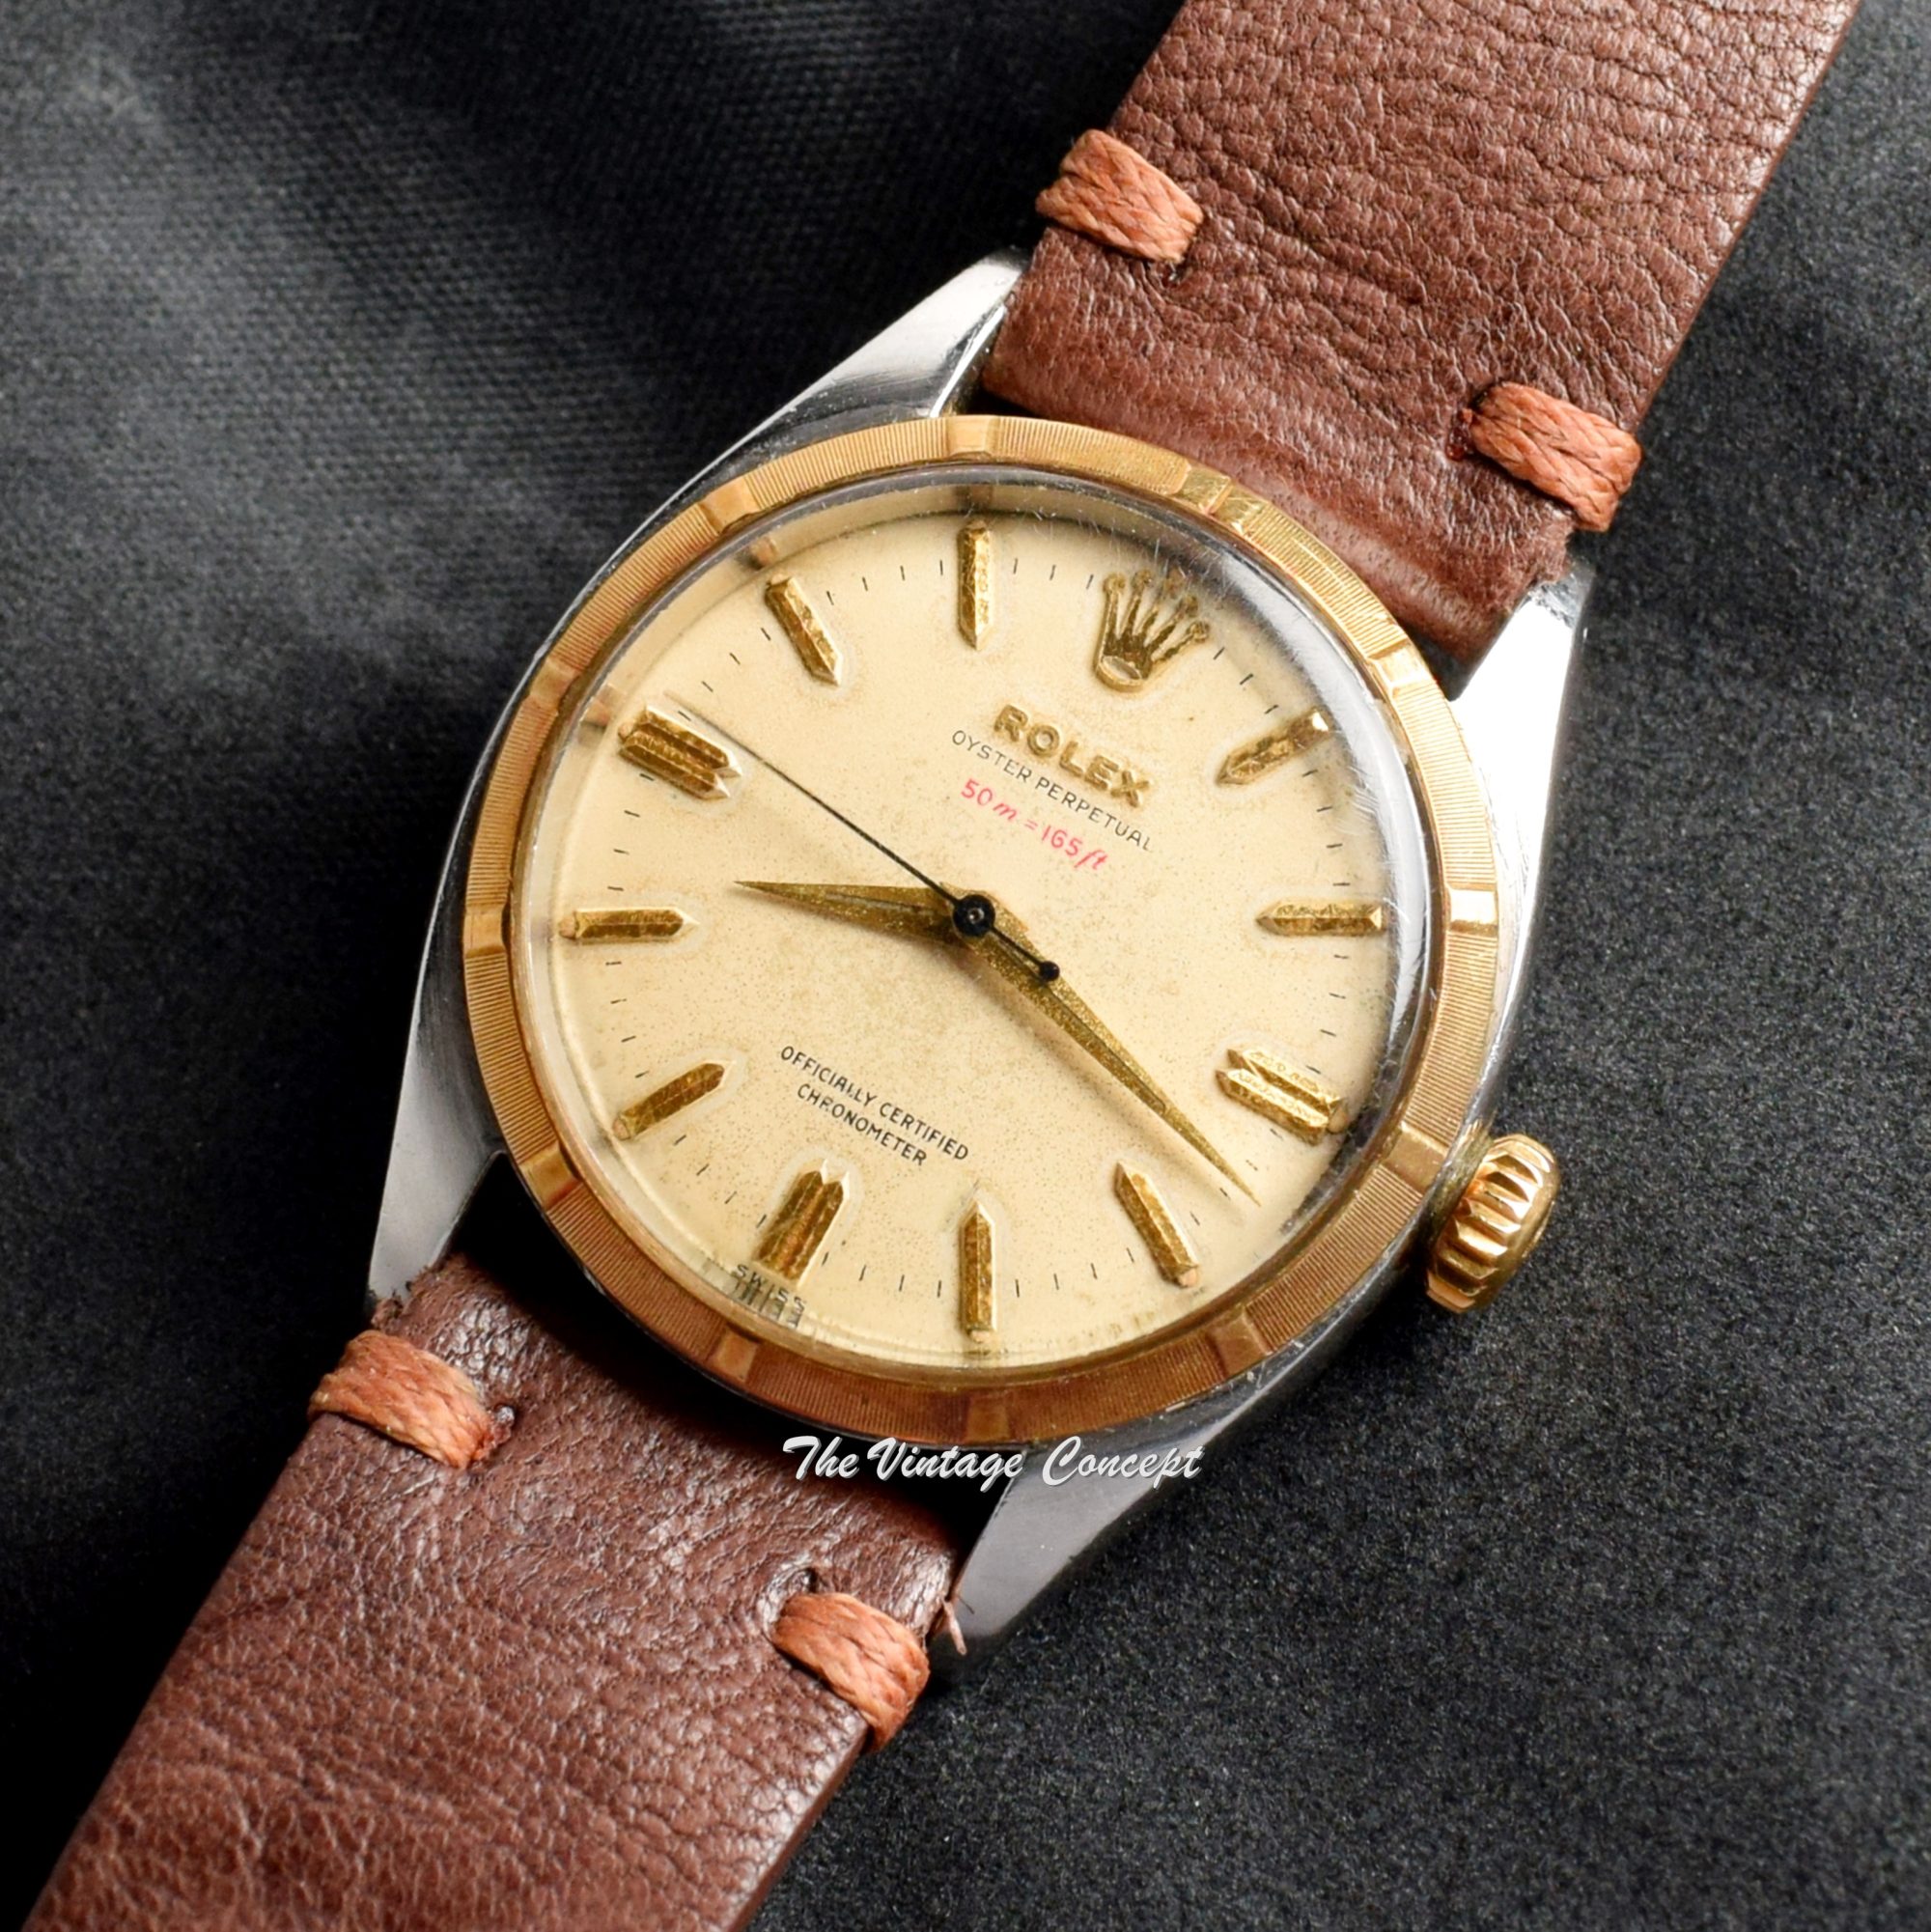 Rolex Oyster Perpetual Red Depth "50m=165ft" 6581 - The Vintage Concept